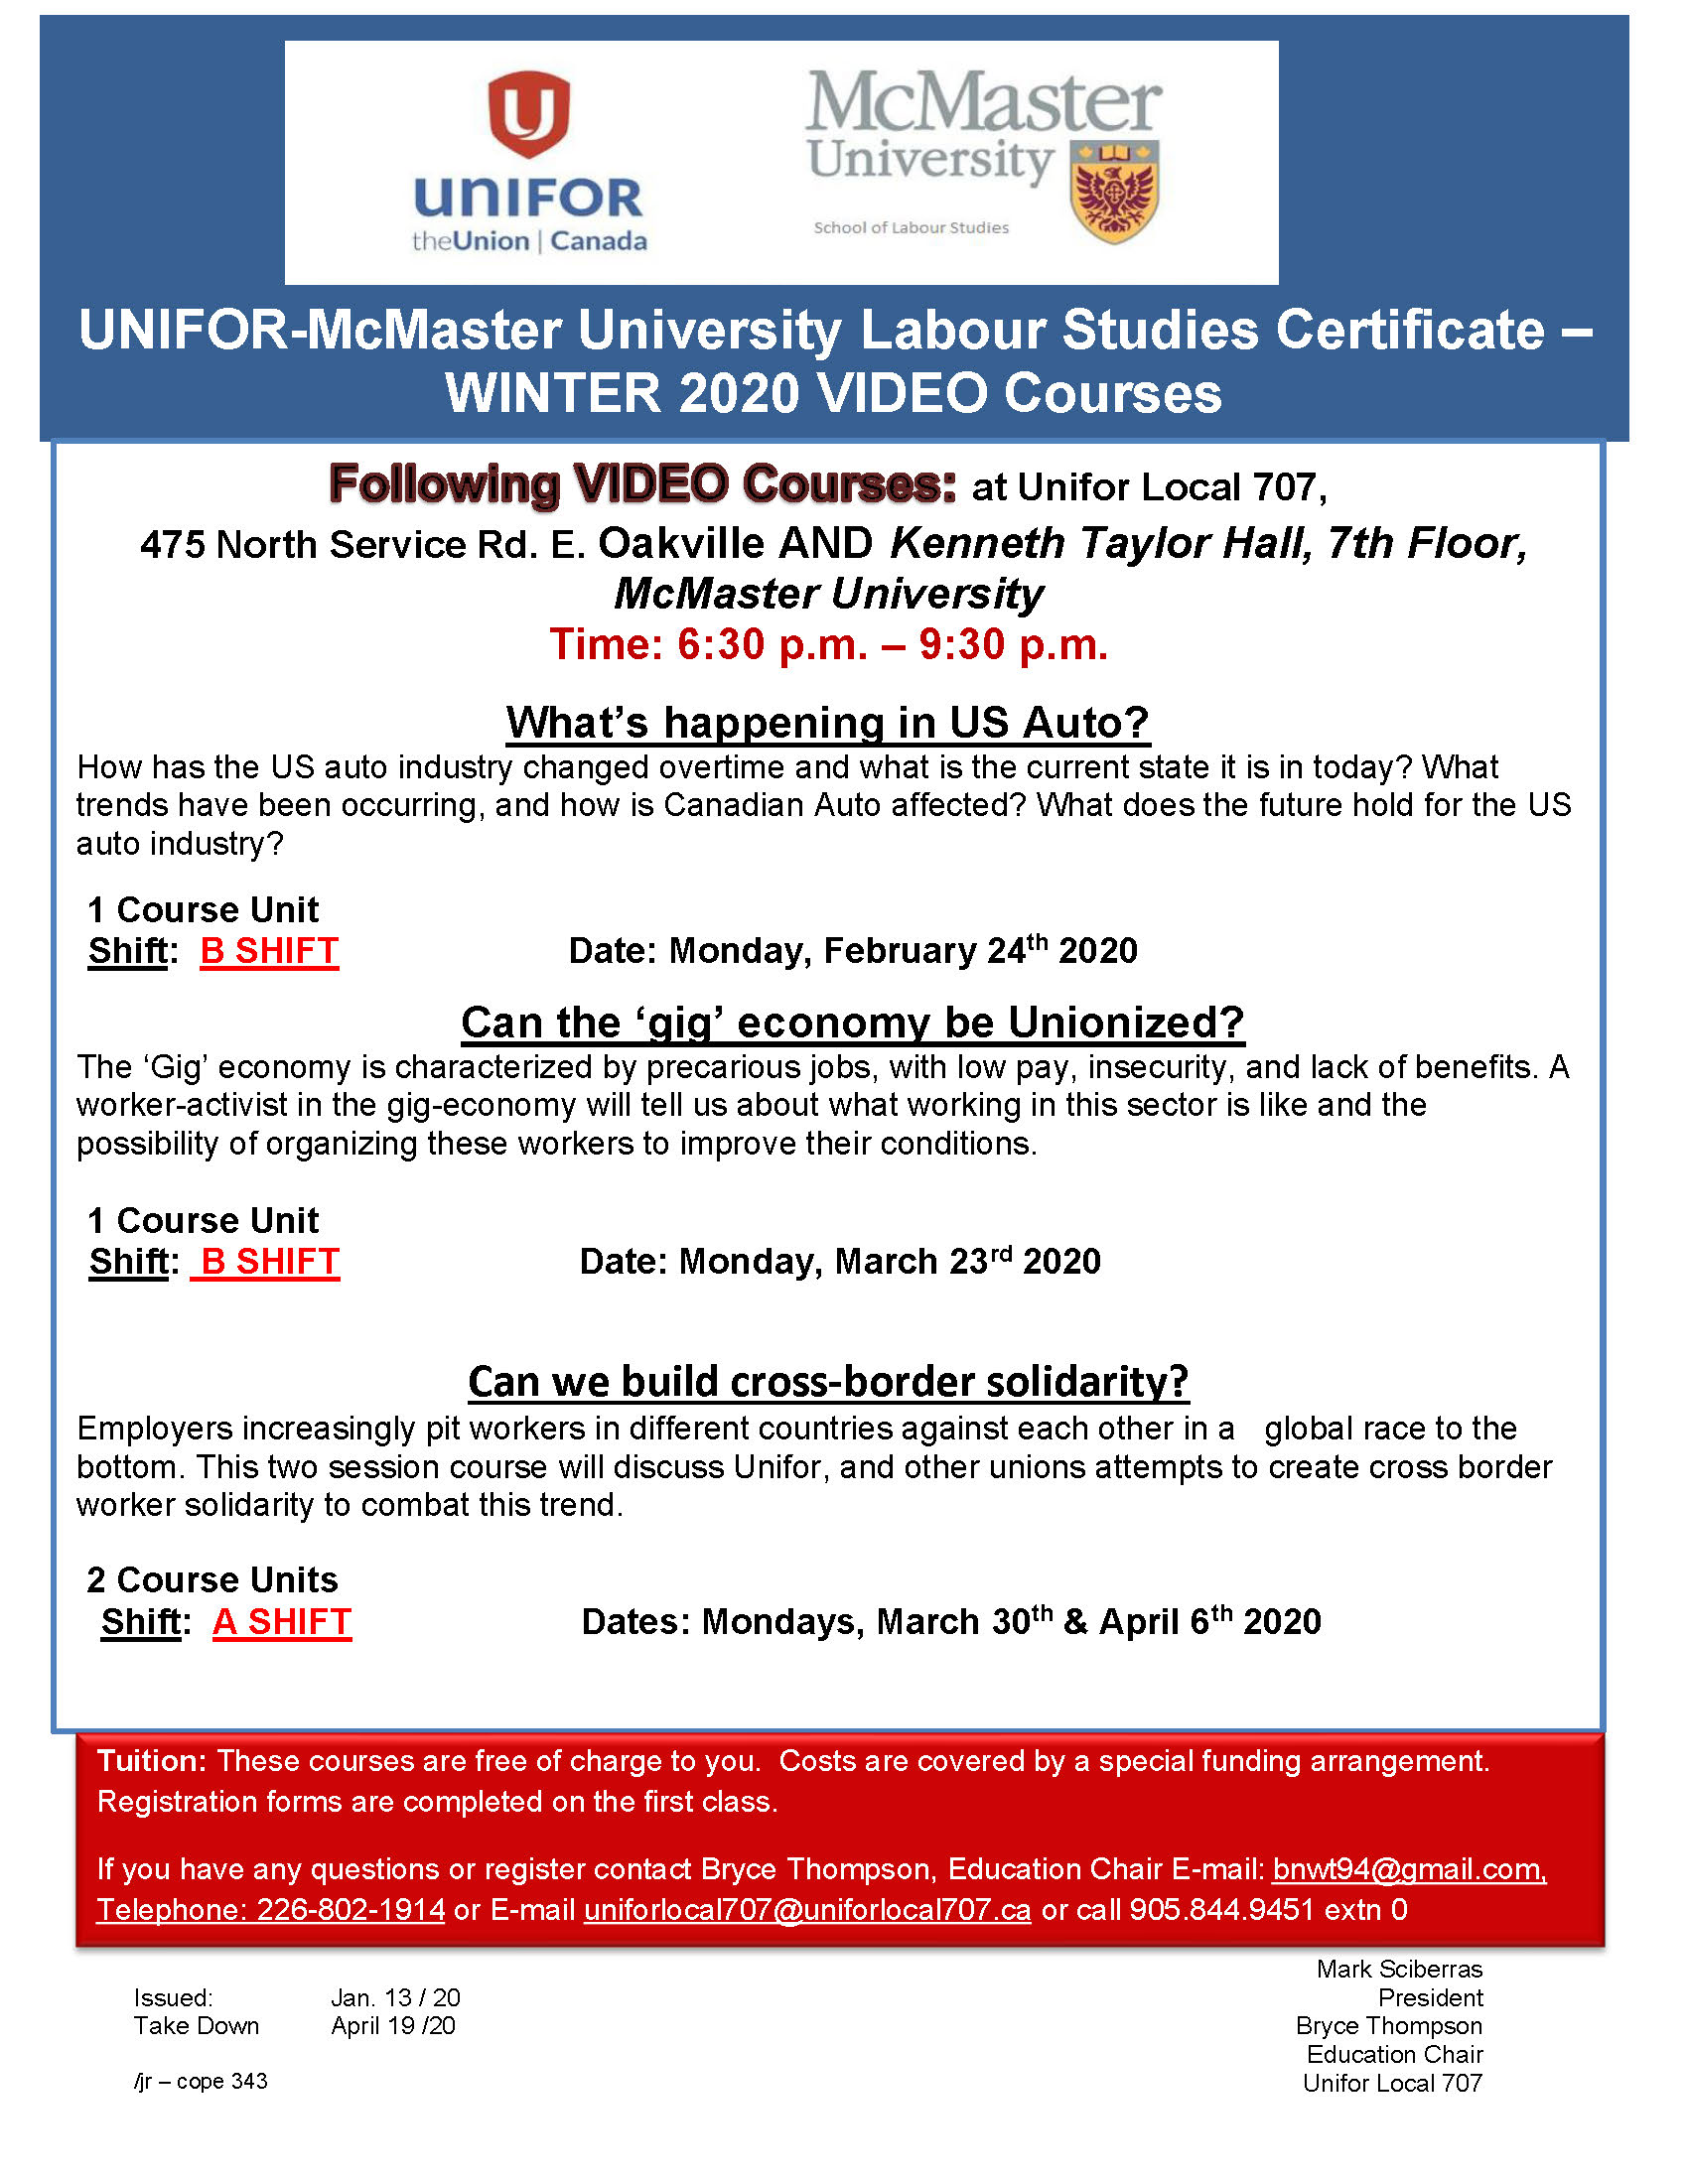 McMaster Studies Certificate WINTER 2020 Video Courses at Unifor Local 707